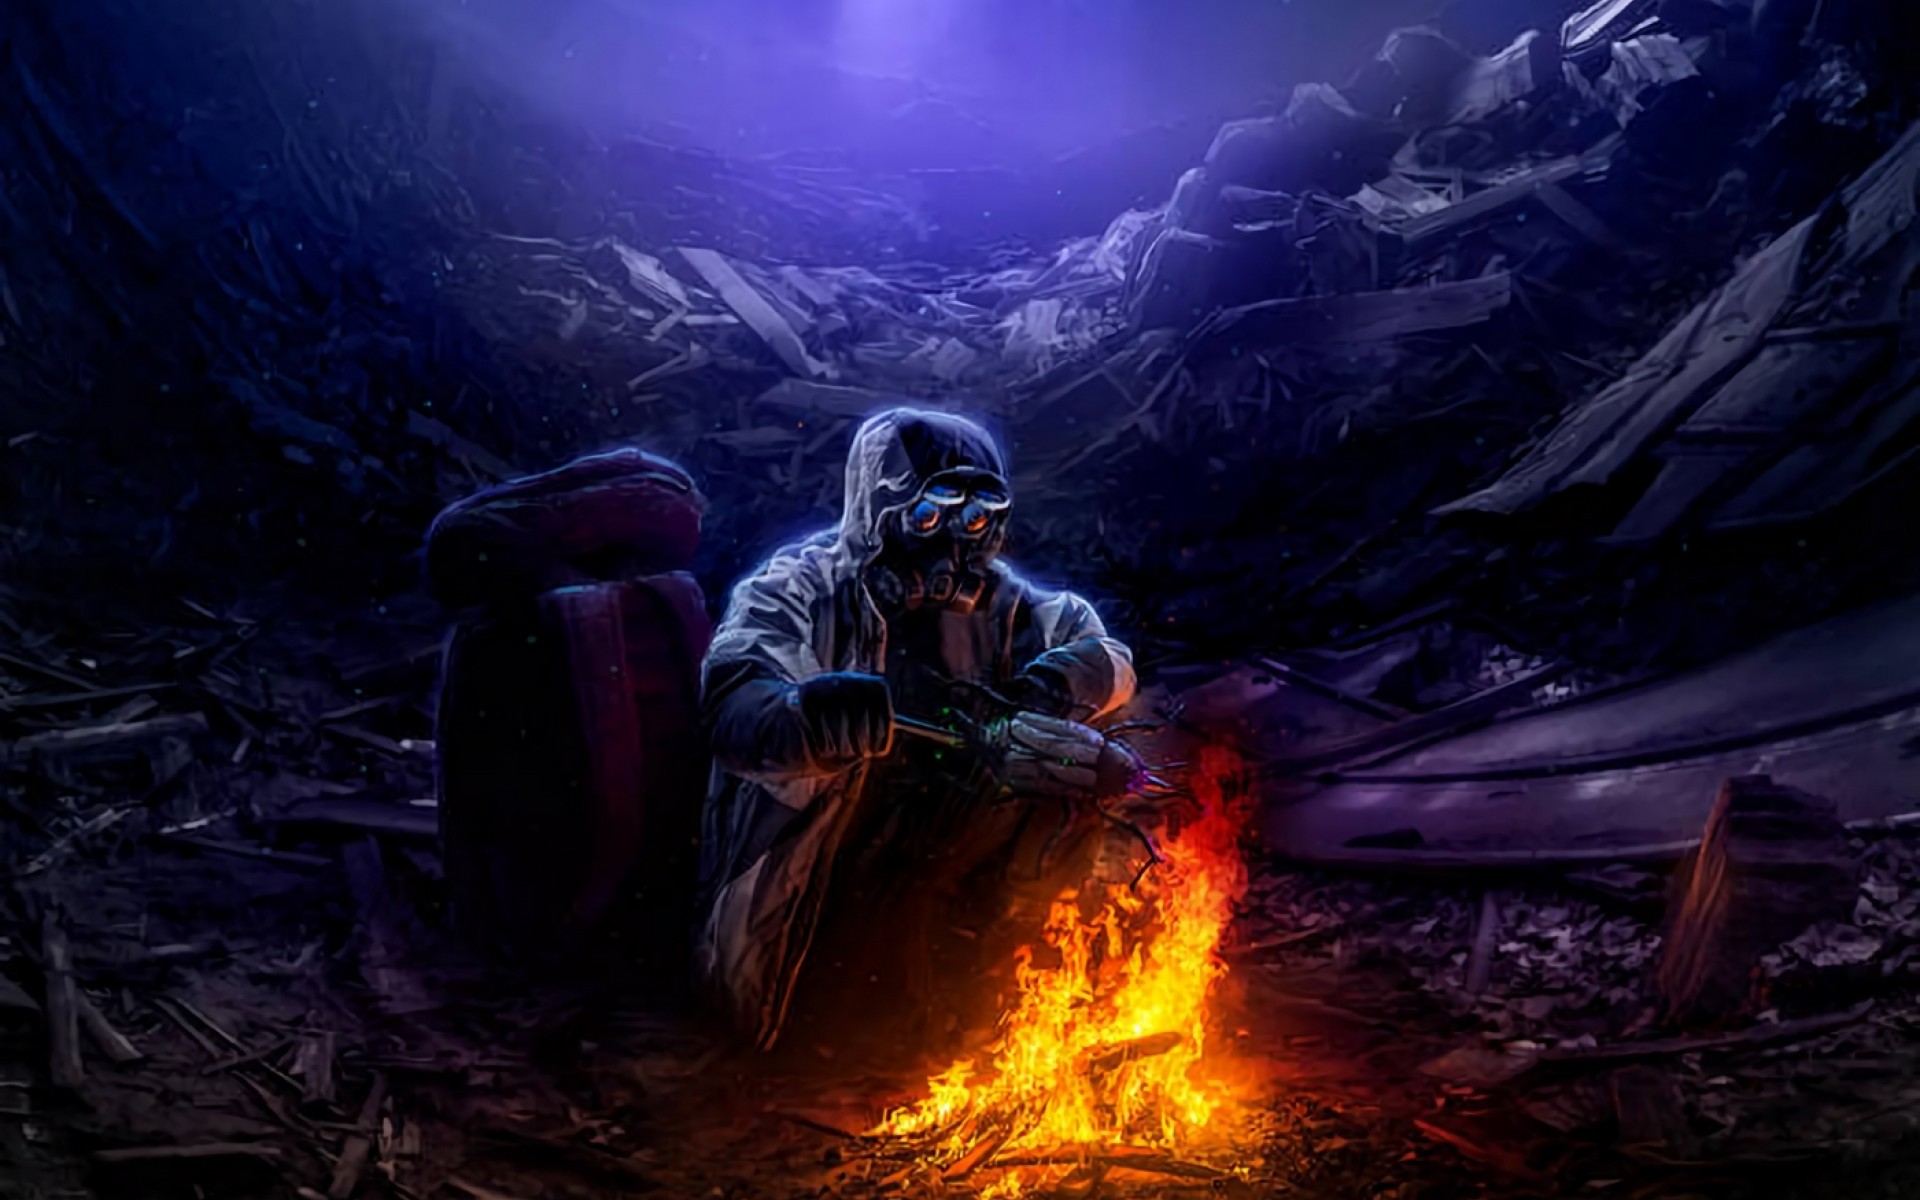 Cave man next to the fire HD Wallpaper - 1920x1200.